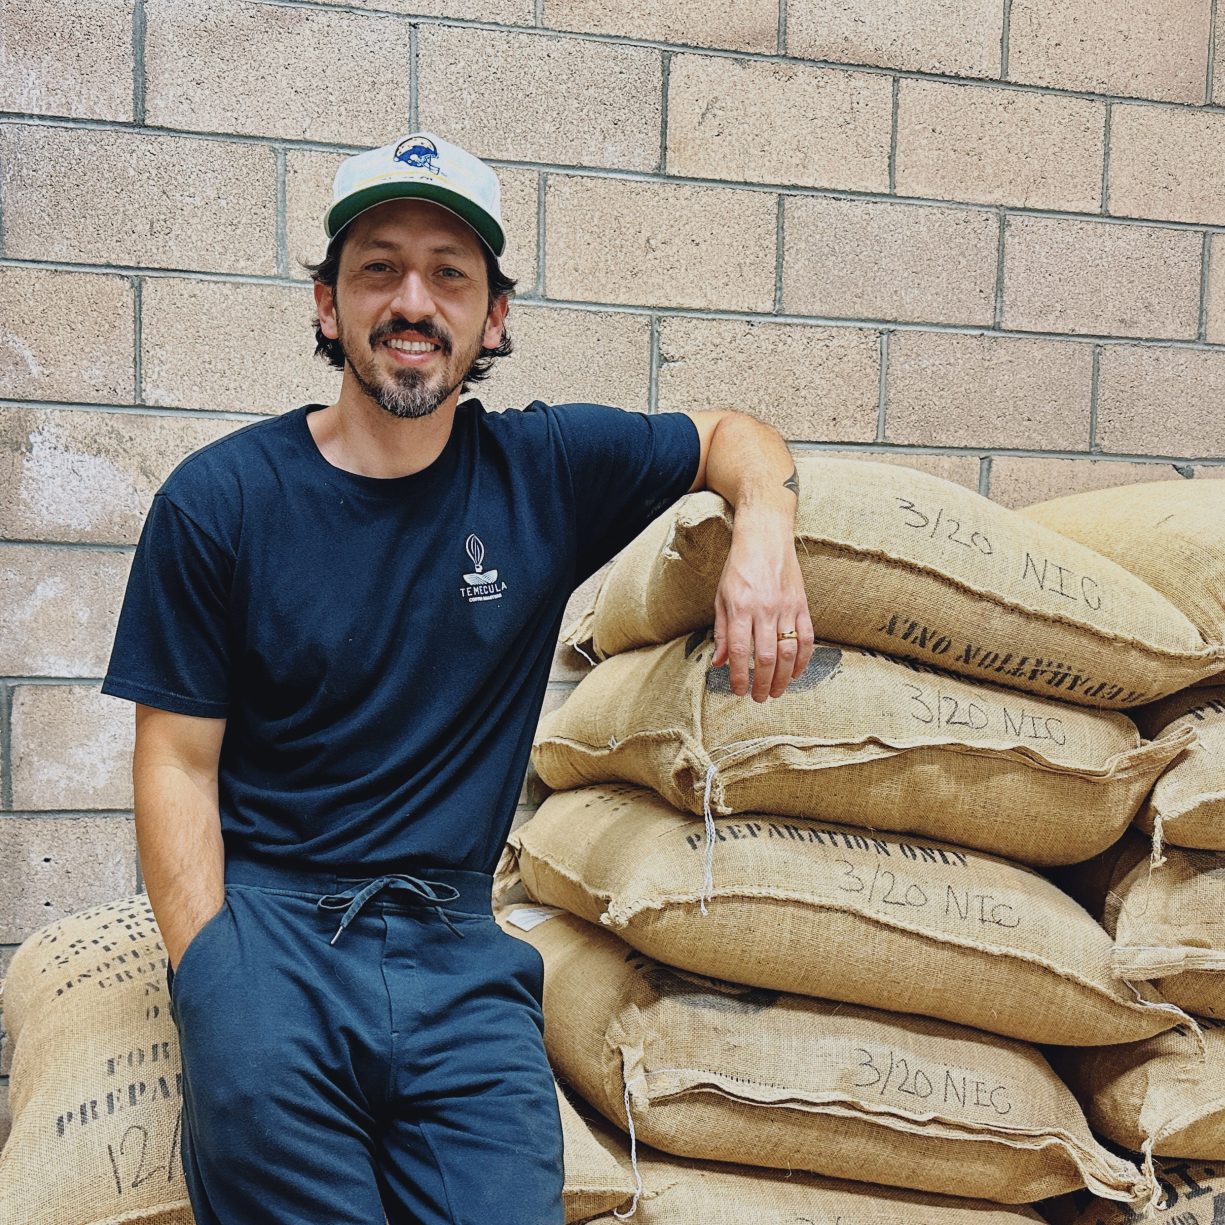 Ed Burga leans against a stack of sacks containing coffee beans. His shirt has the Temecula Coffee Roasters logo on it.